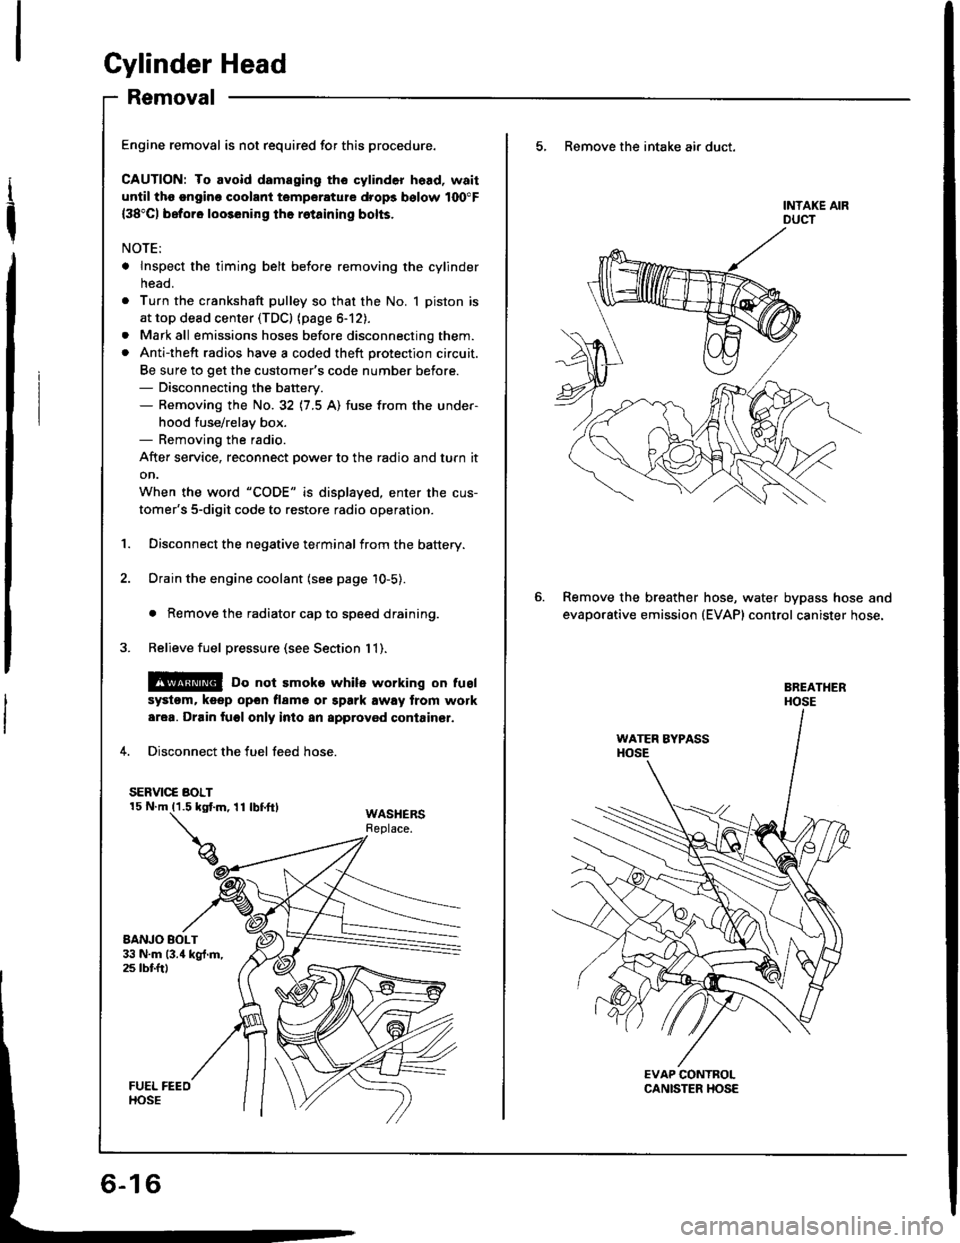 ACURA INTEGRA 1994  Service Repair Manual Gylinder Head
Removal
I
t
Engine removal is not required for this procedure.
CAUTION: To avoid damaging tho cylinder head, wait
until tho ongino coolant temporature drops bolow 100"F
{38"C) beforo loo